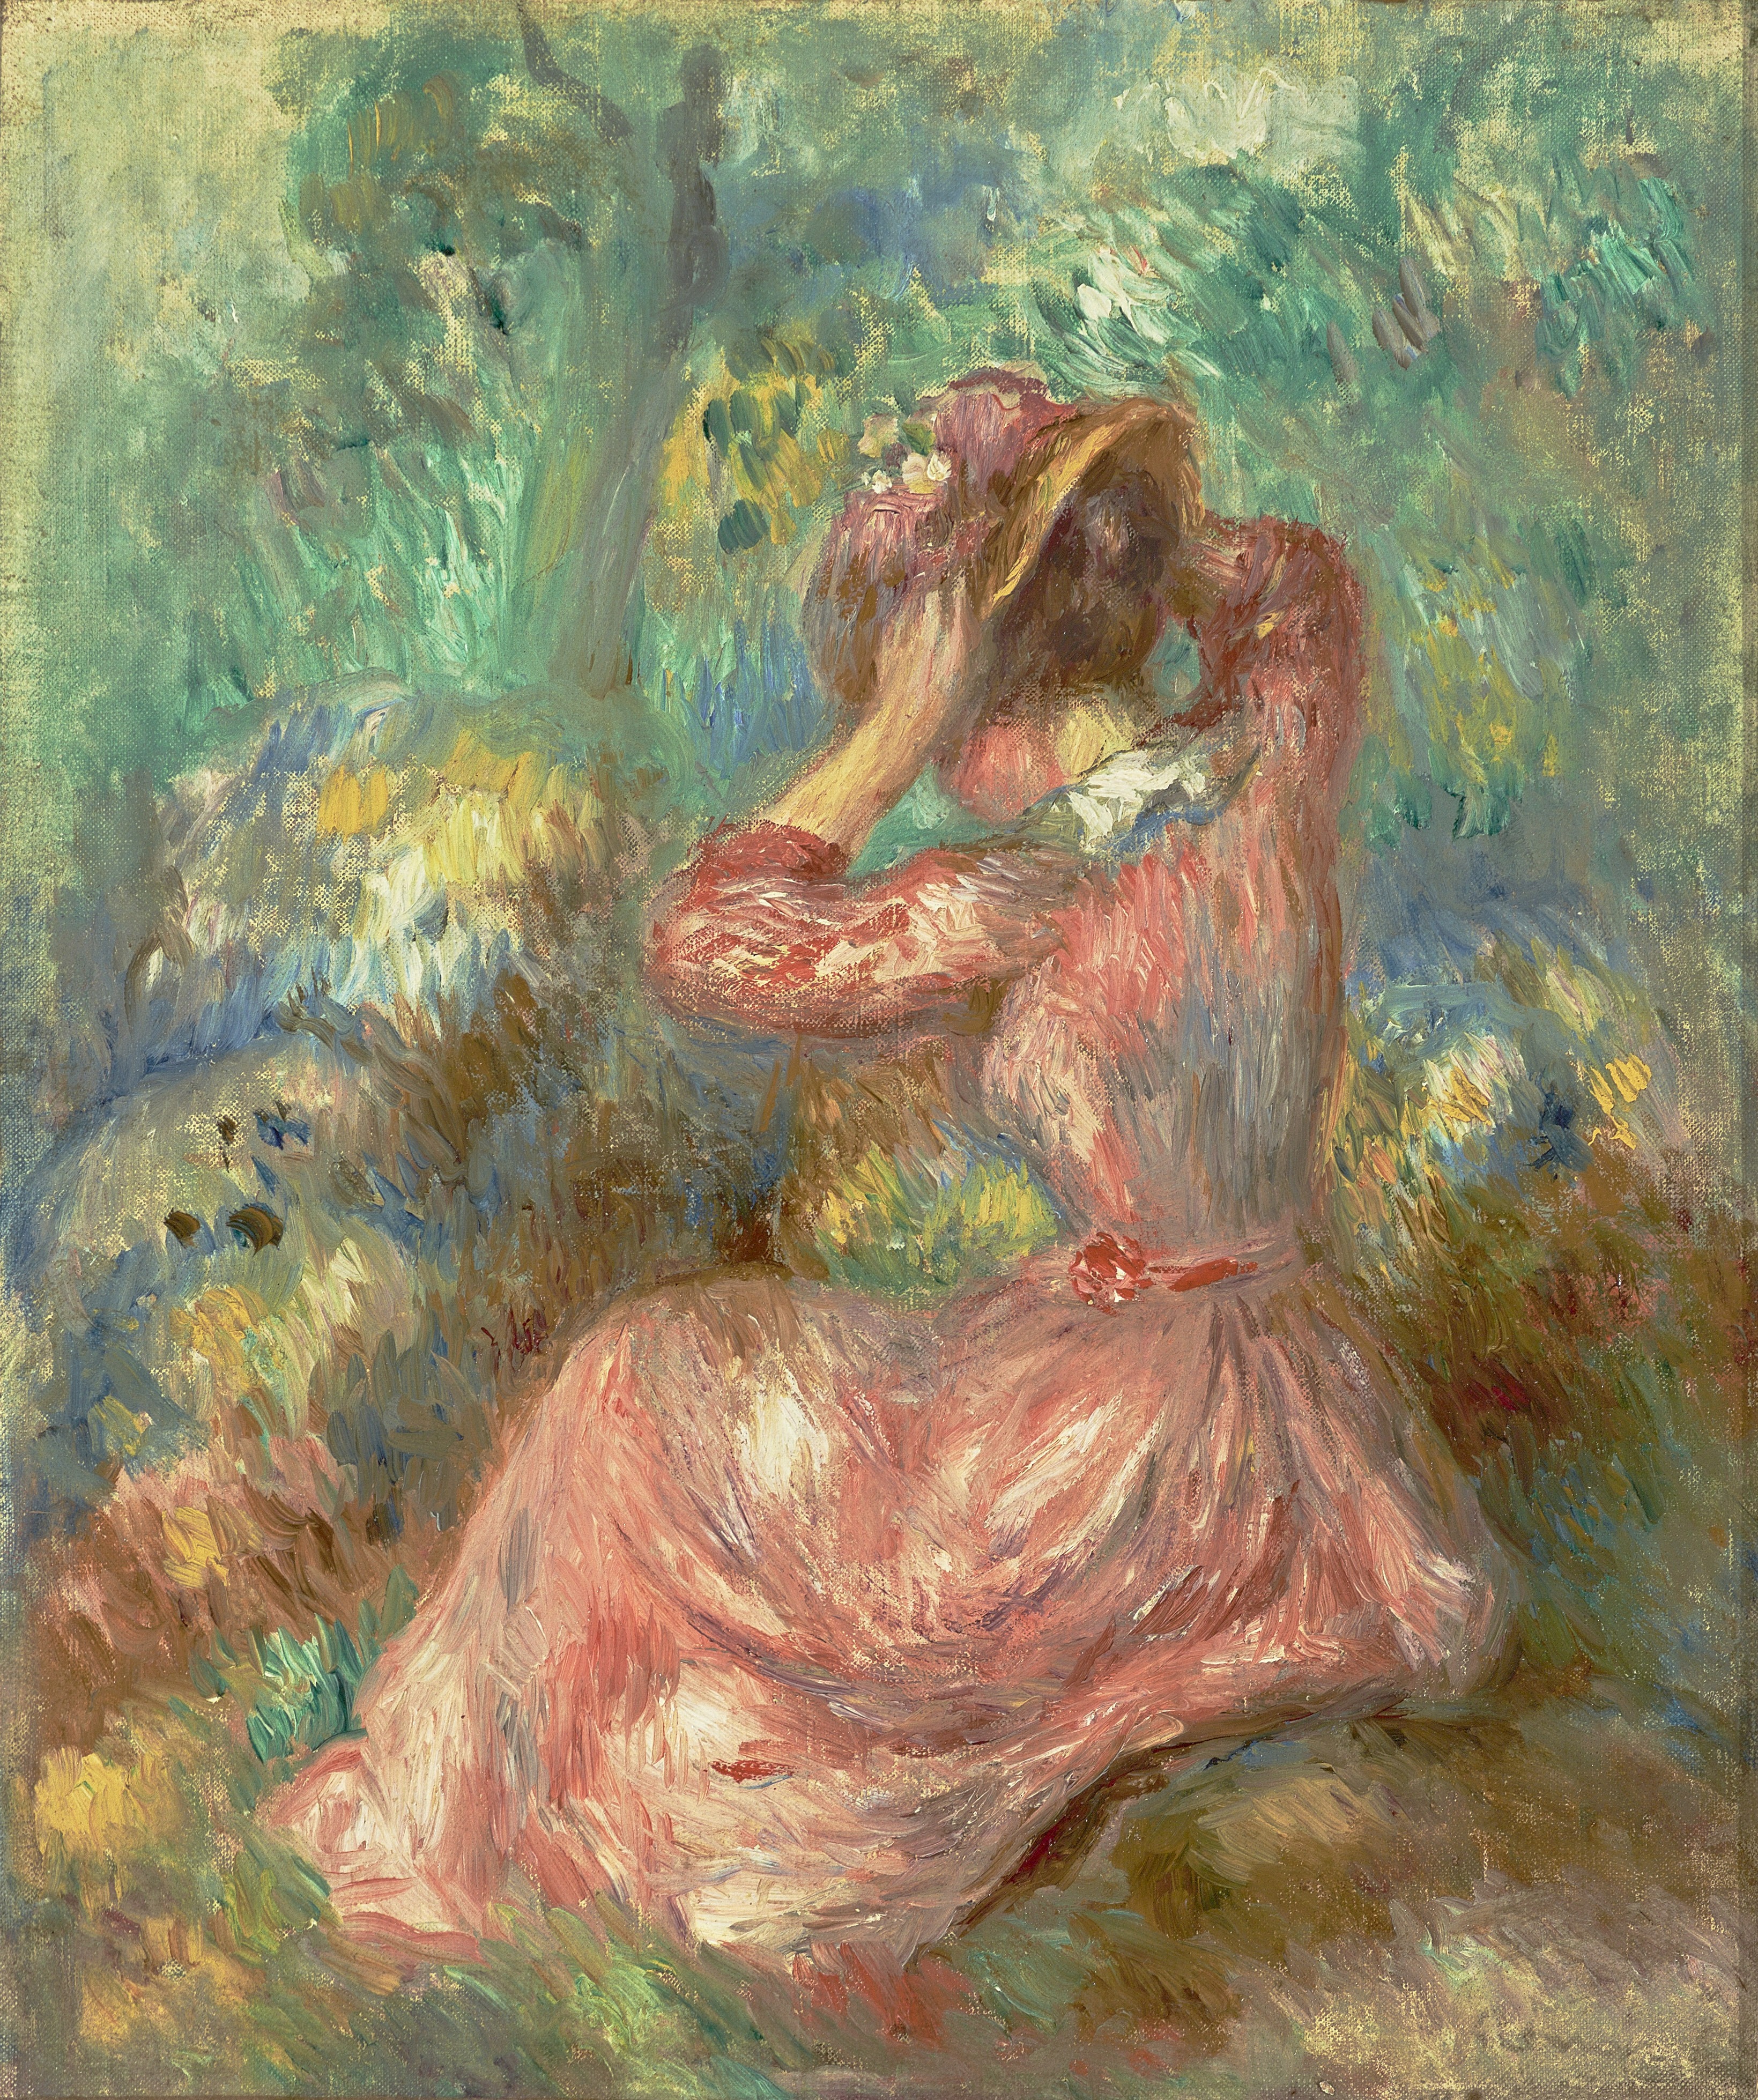 Impressionistic painting of a woman in a pink dress wearing a hat sitting on the ground.